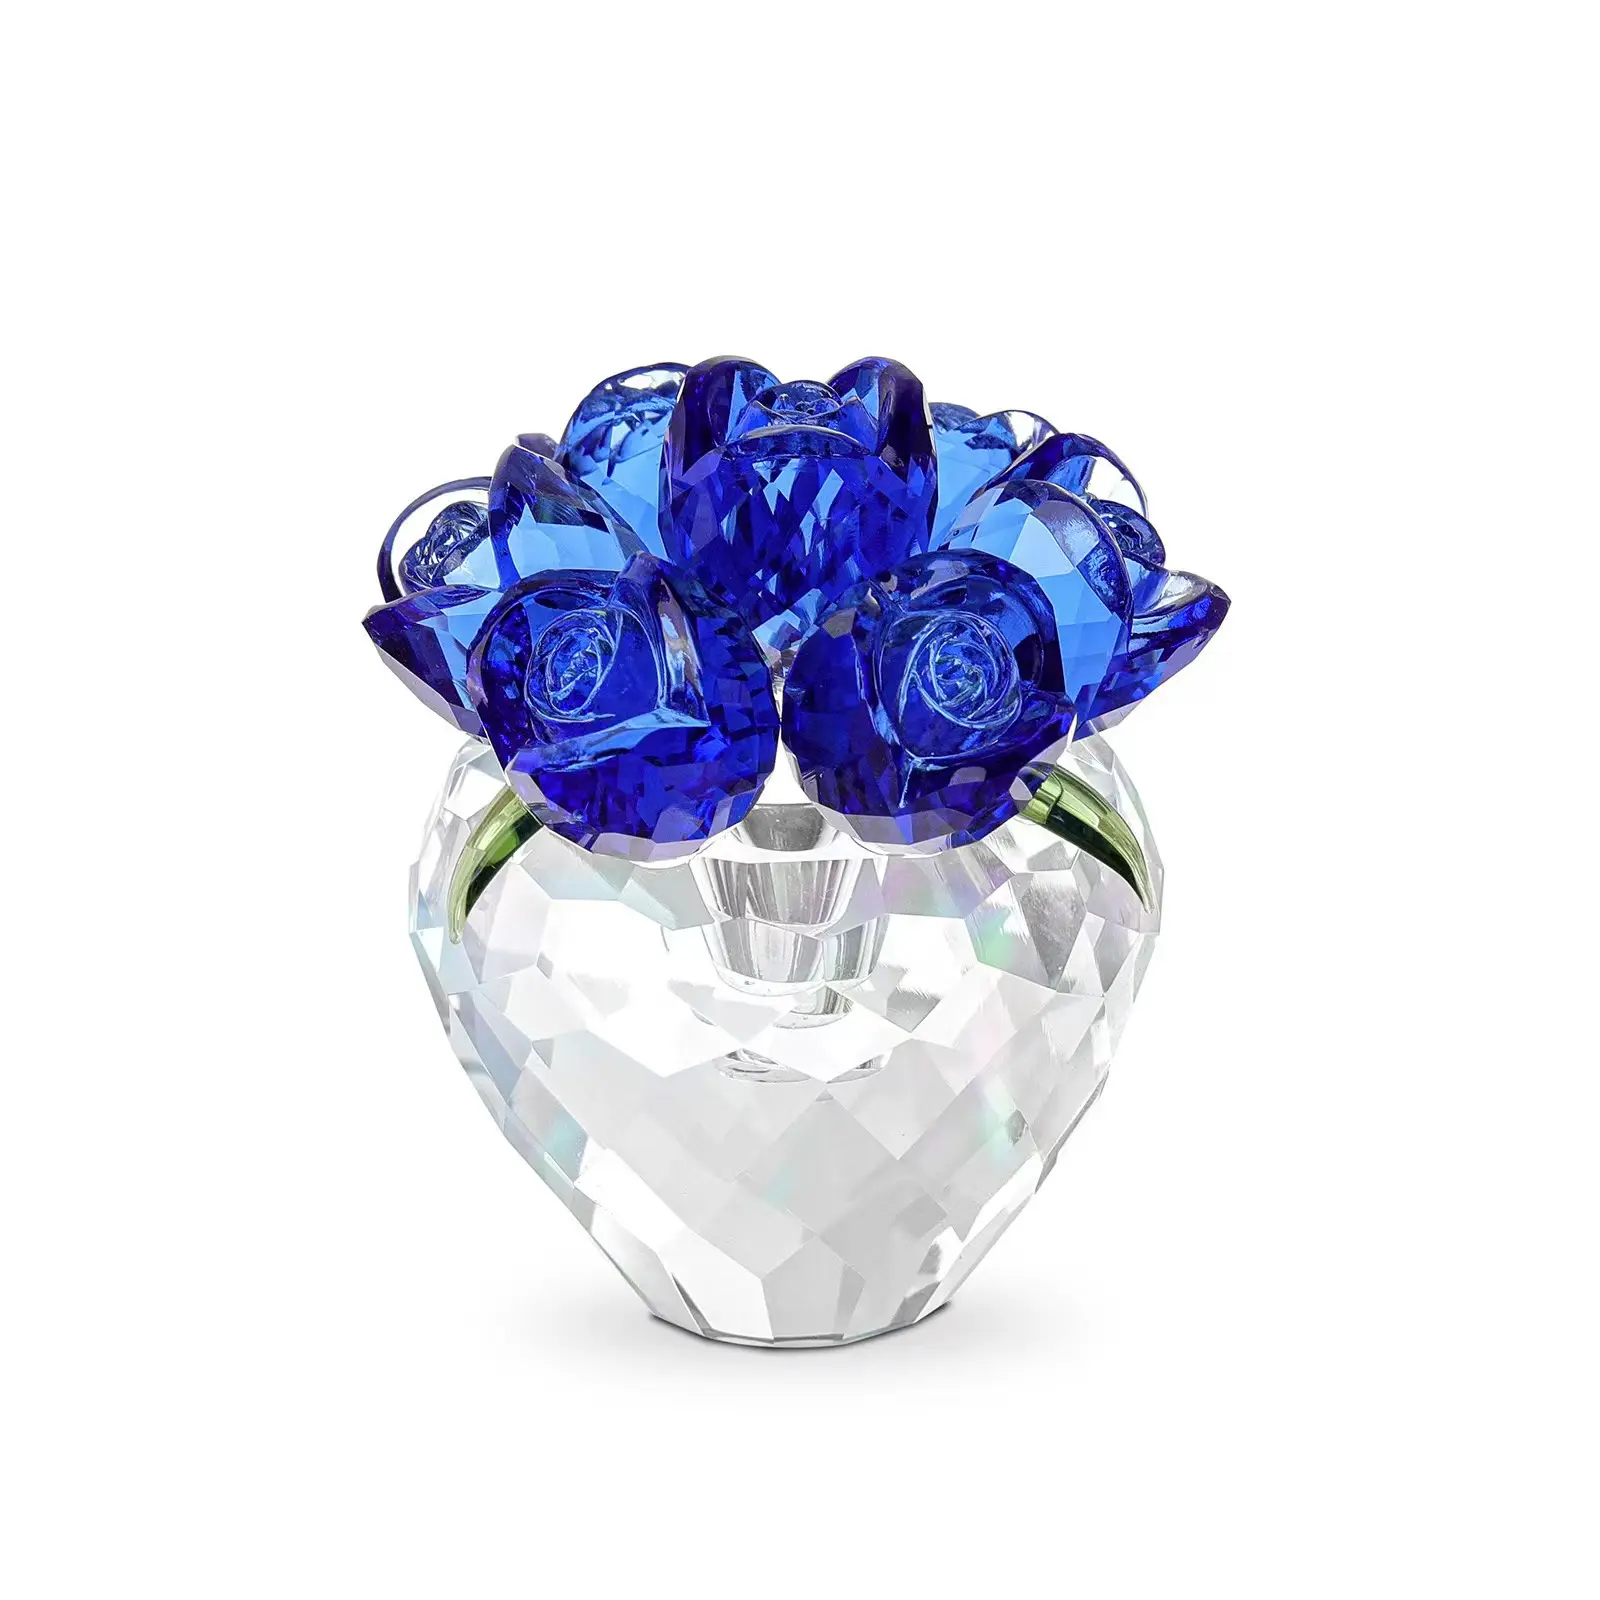 Crystal Rose Bouquet Heart Crystal Figurine Mother's Day Birthday Gifts Home Decor Crystal Ornament